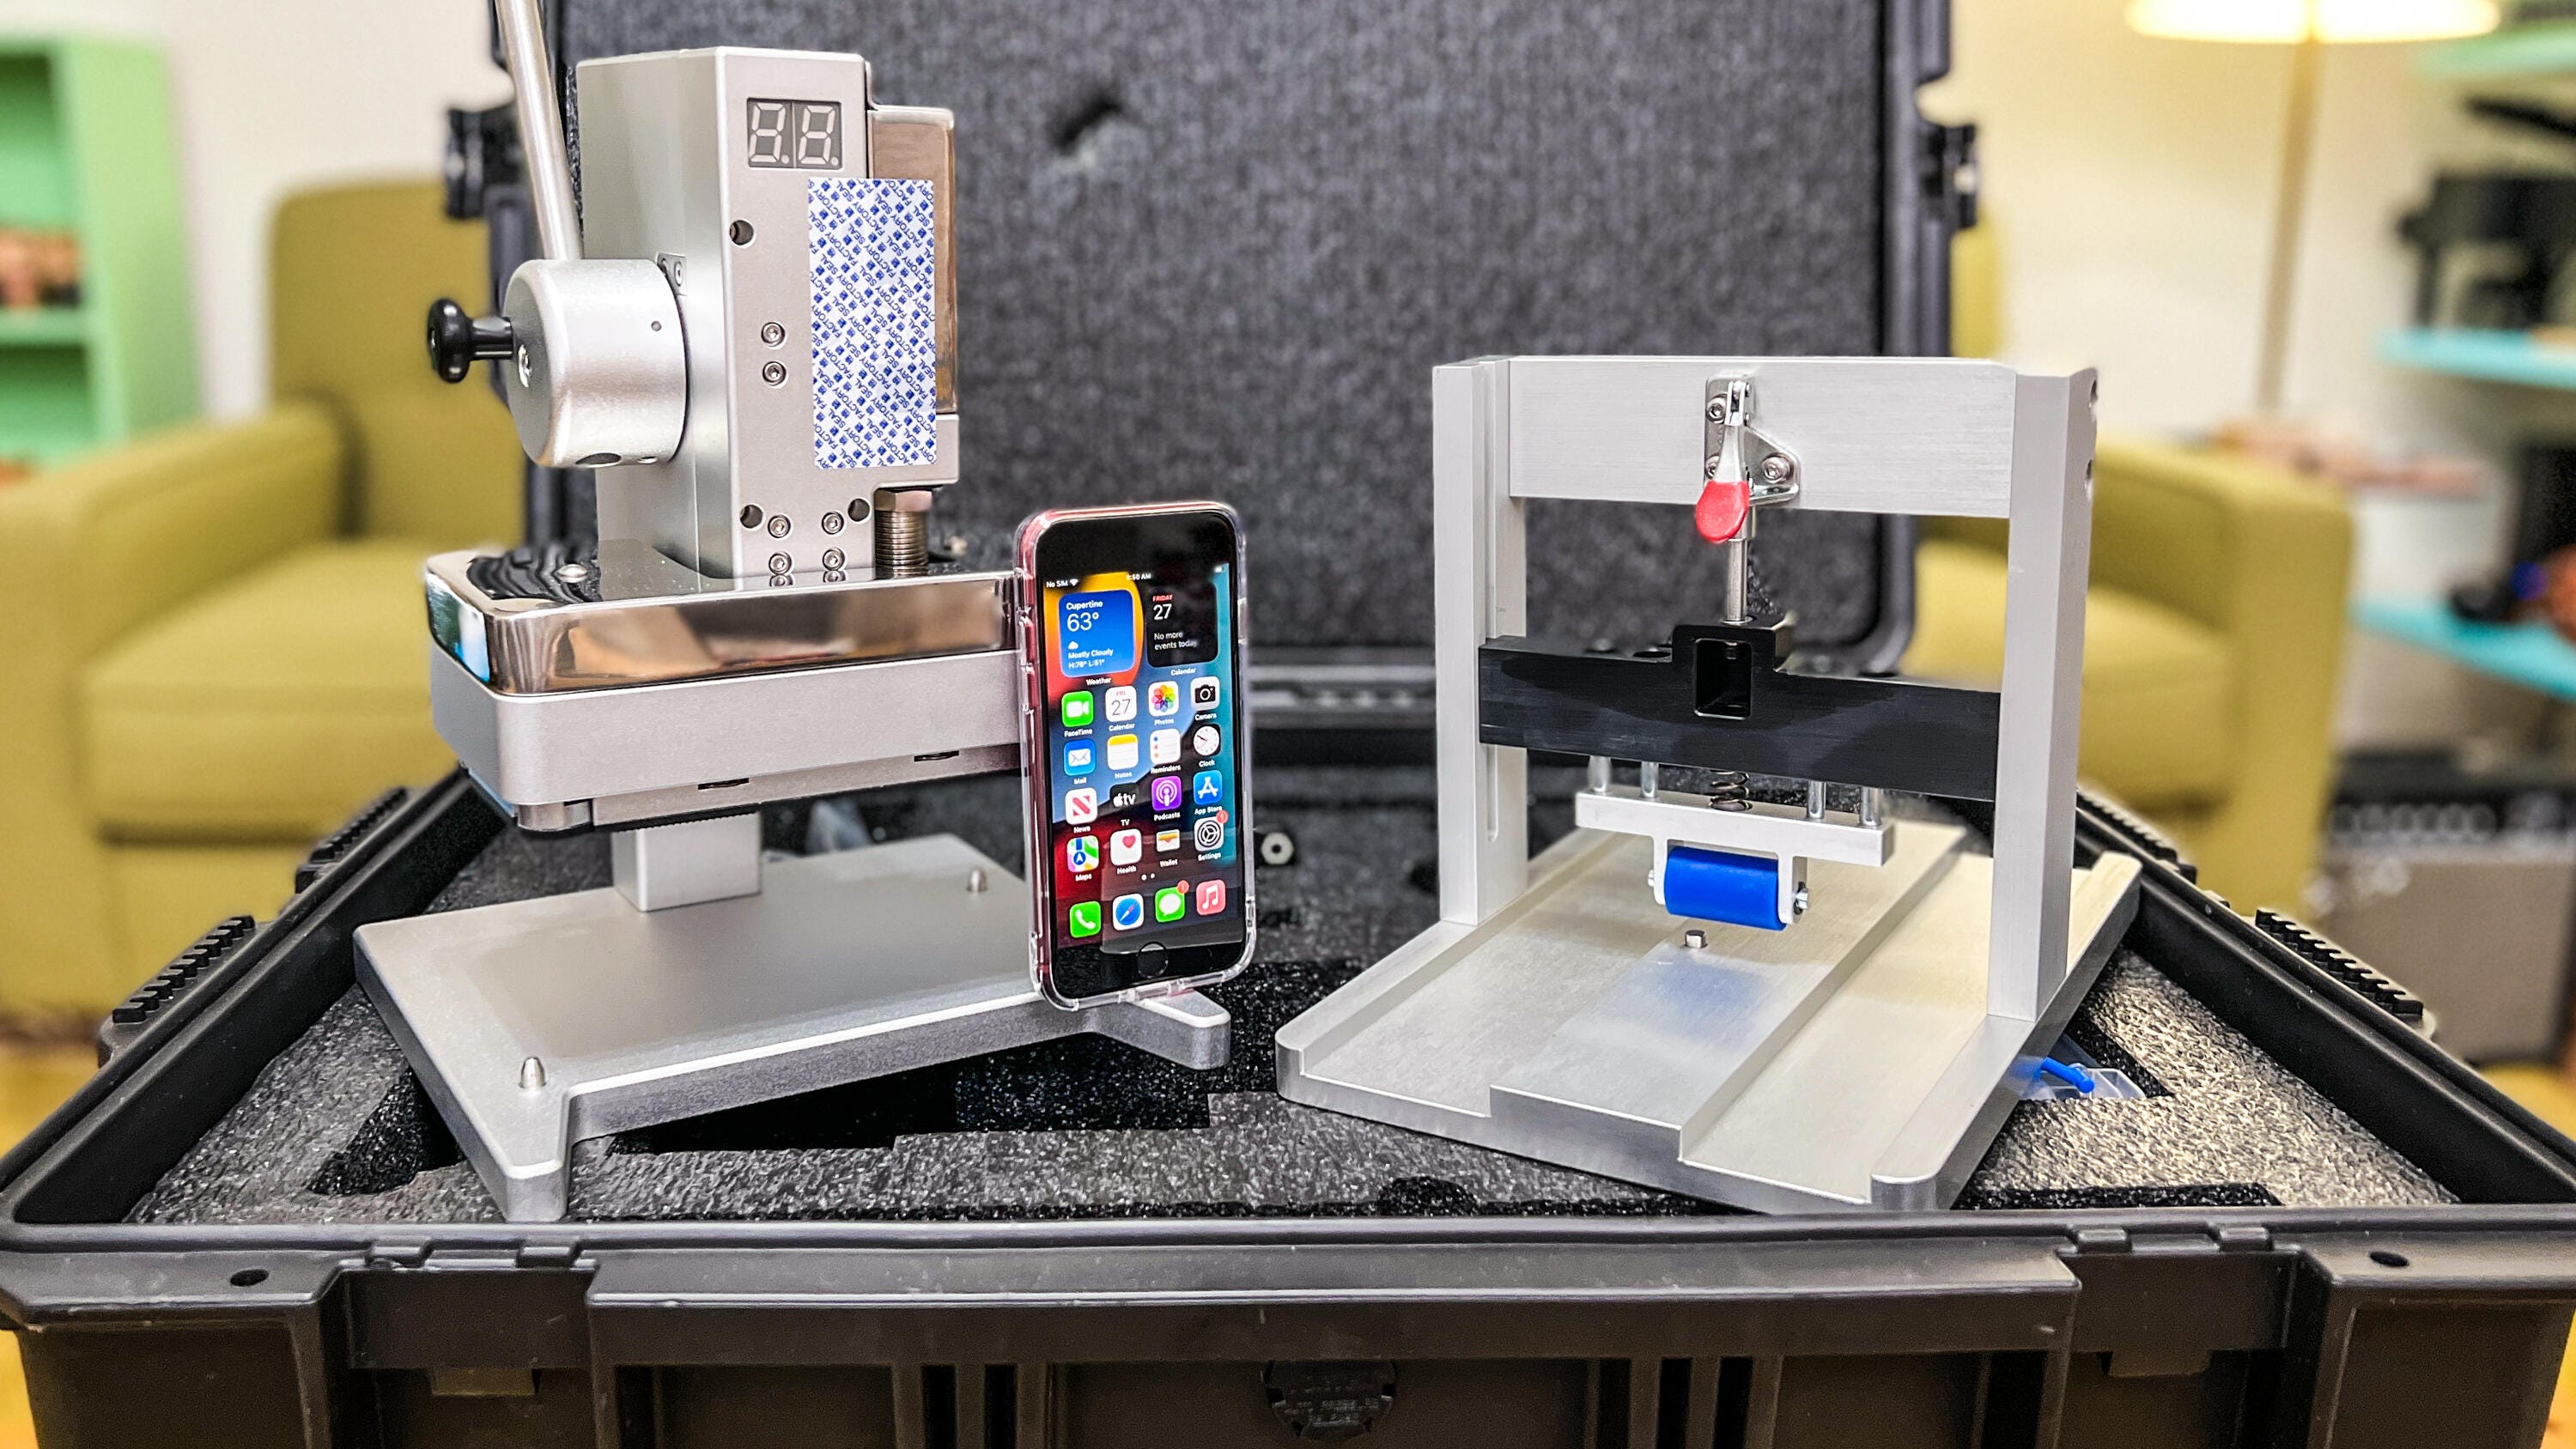 Fix Your iPhone Screen With Apple's Self-Service Repair Kit - Video - CNET